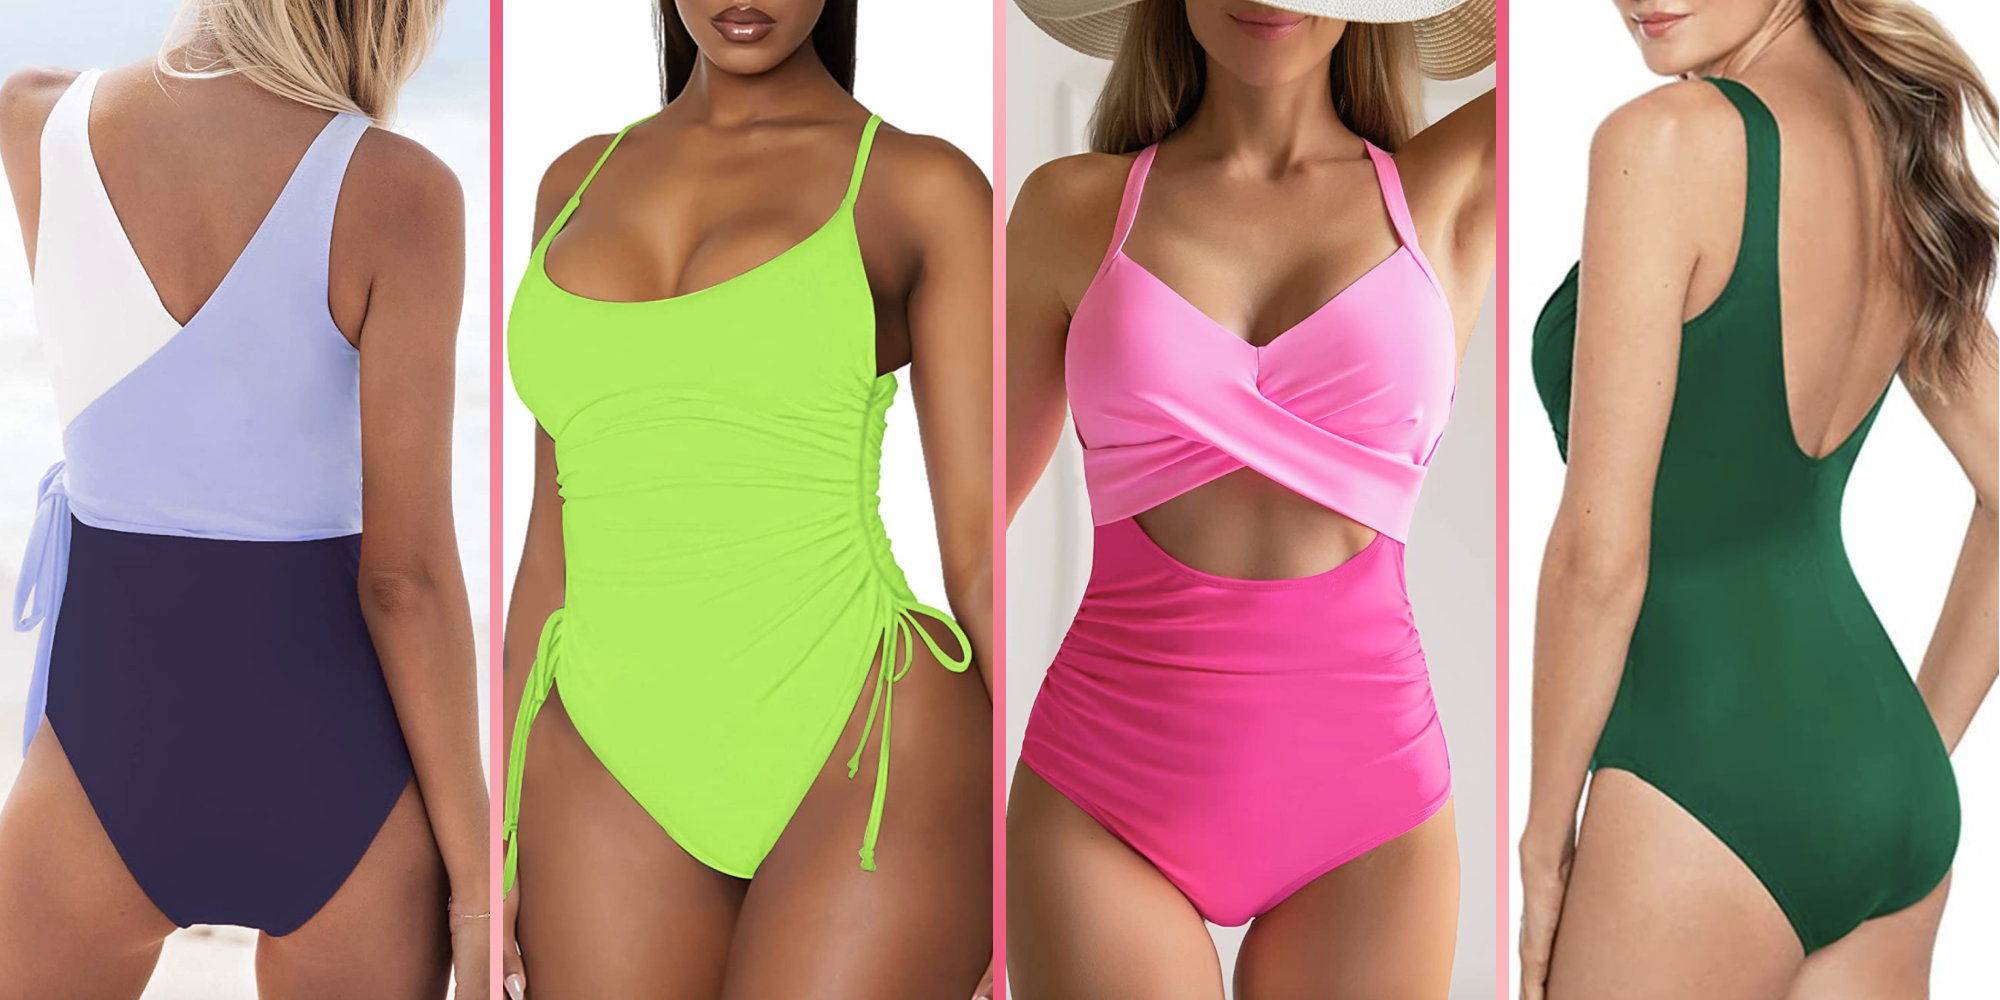 Holipick Pink Striped High Neck Tankini Top Bathing Suit Tops for Women  Tummy Control Tank Tops Swimsuits S